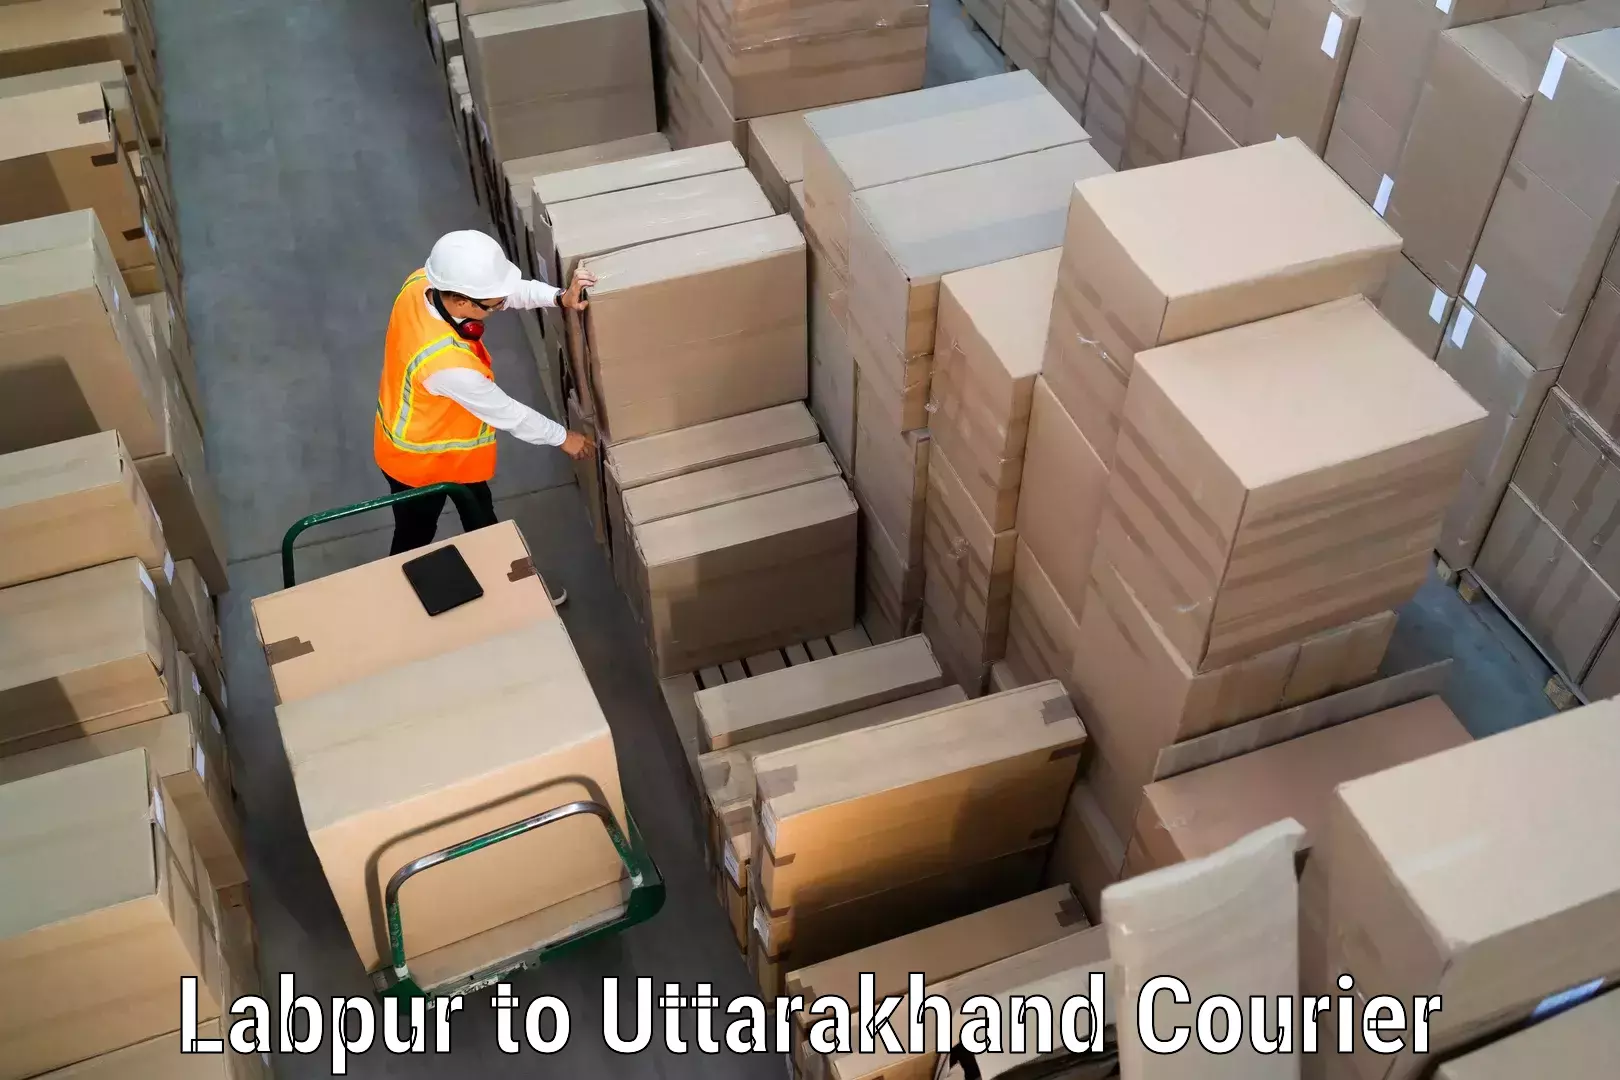 Next-day delivery options in Labpur to Paithani